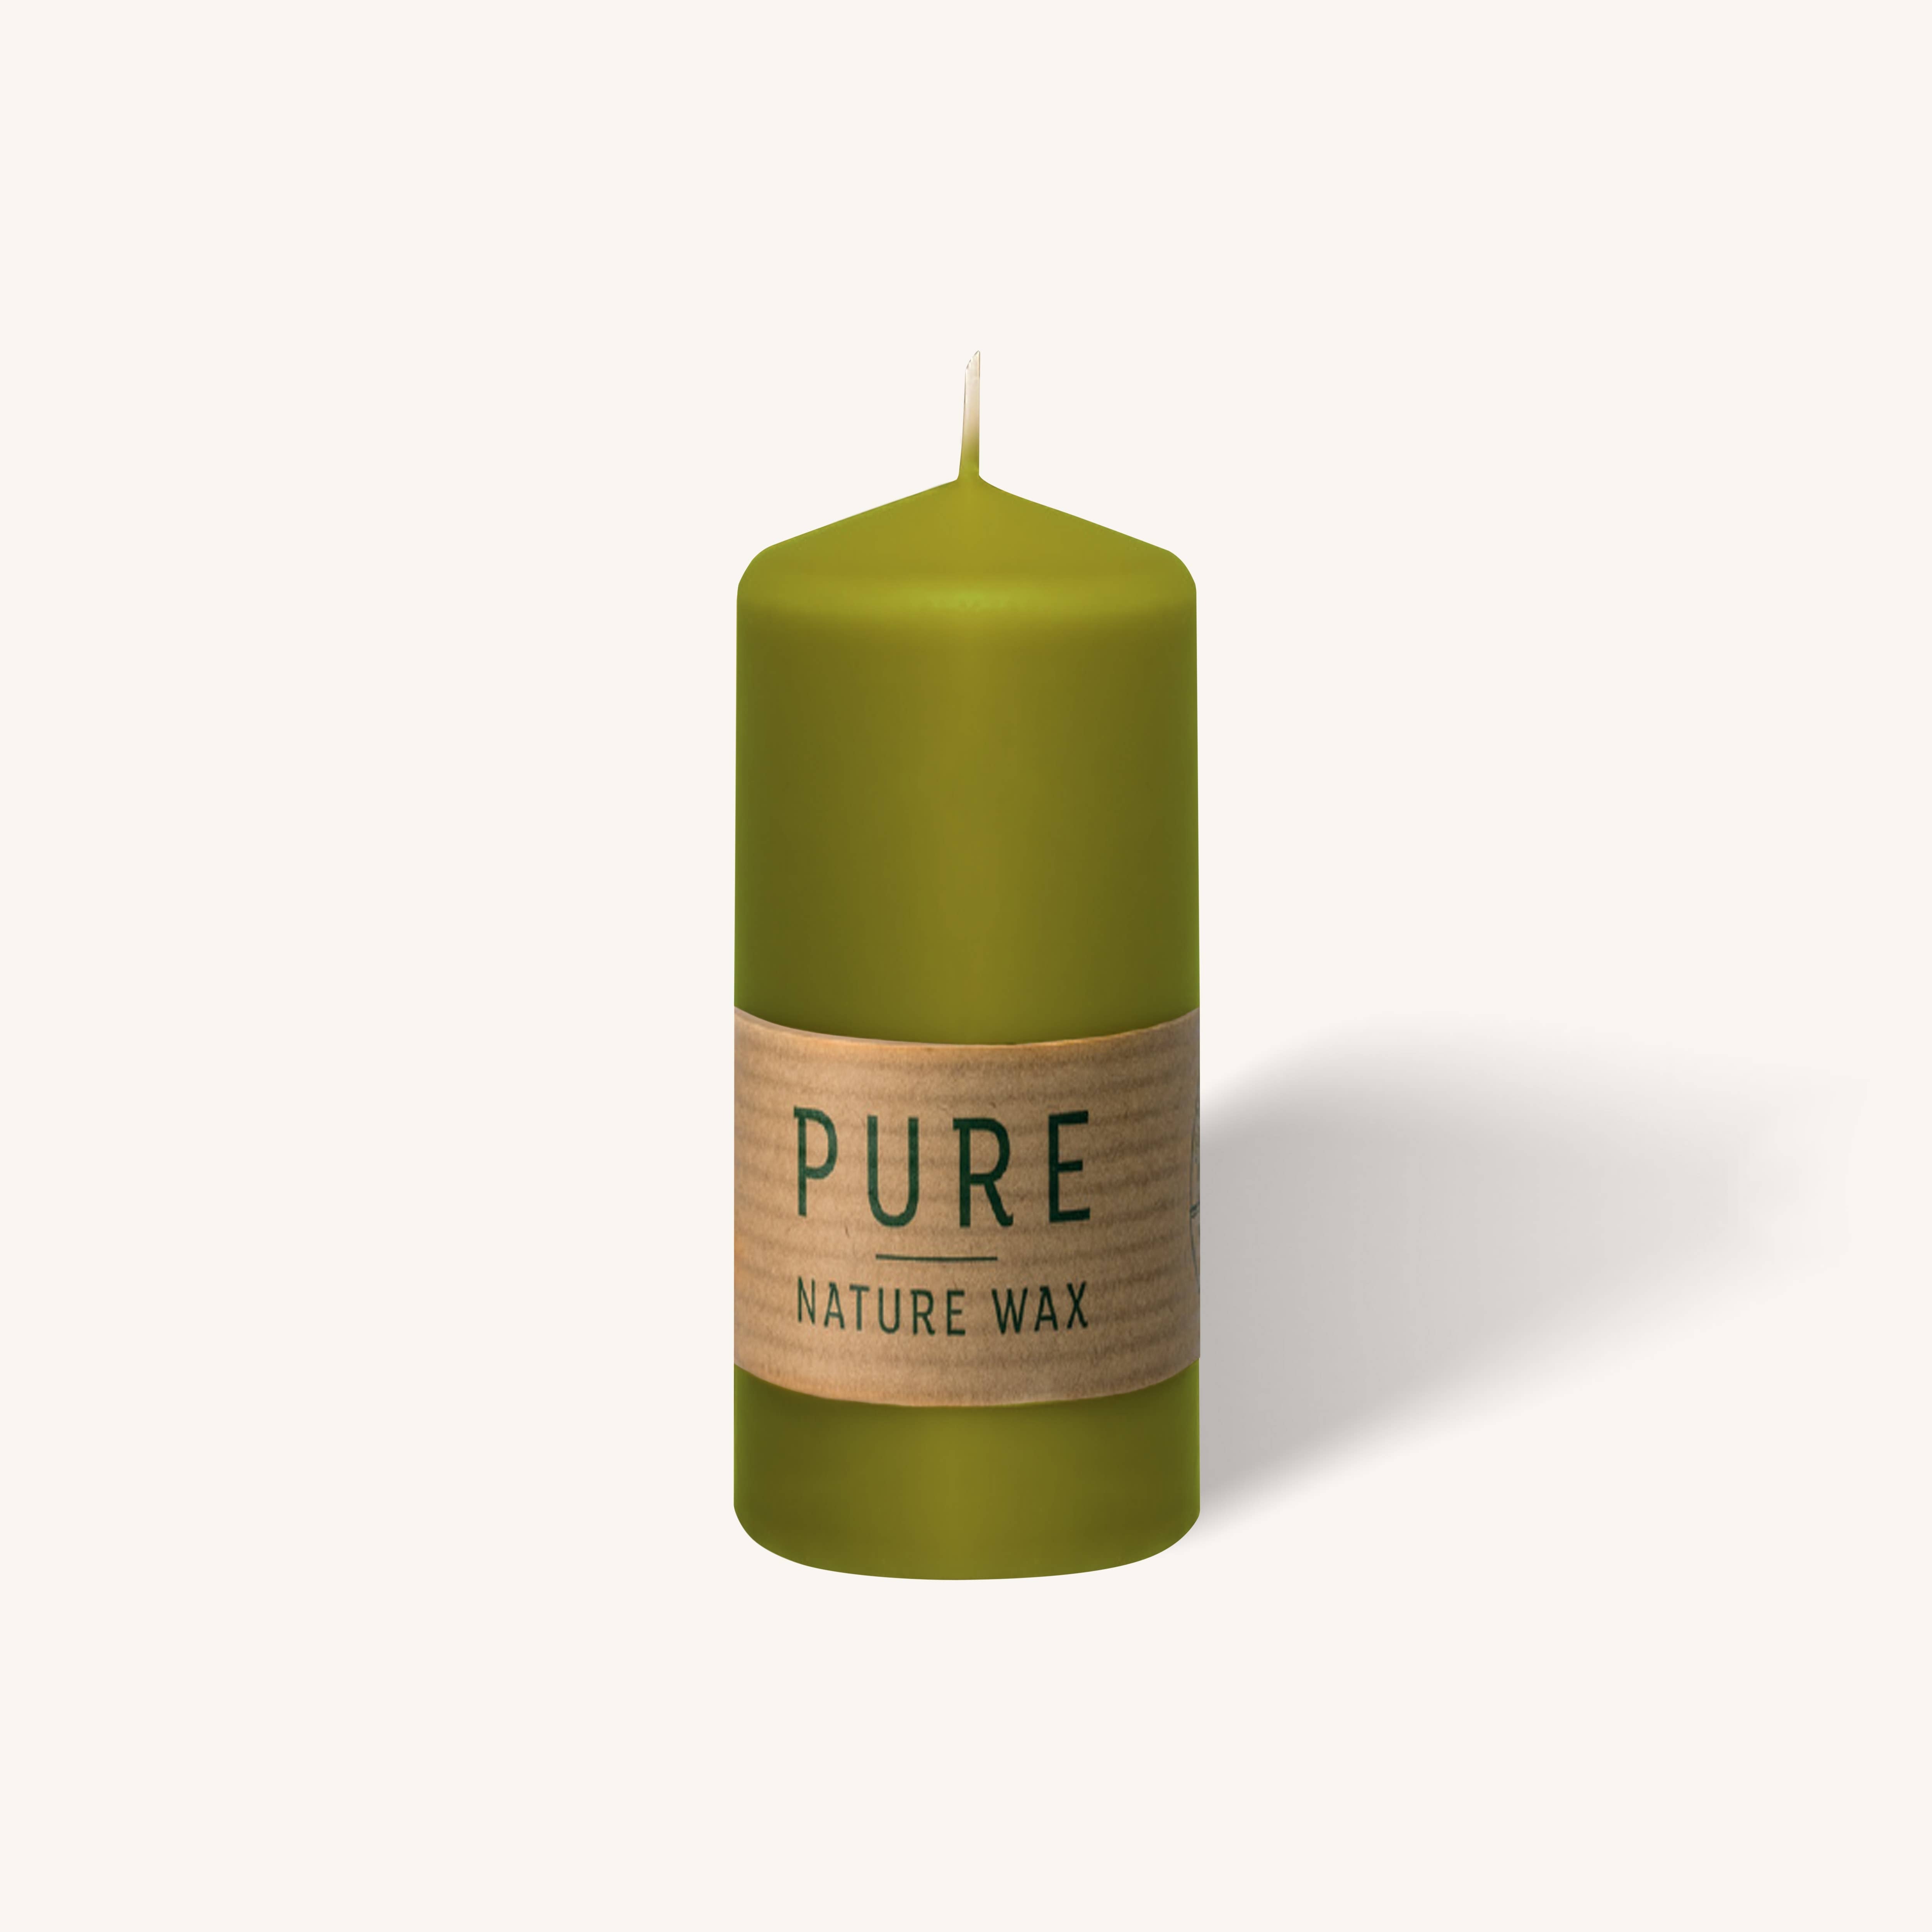 Pure Nature Wax Green Pillar Candle - 2.3" x 5" - 4 Pack